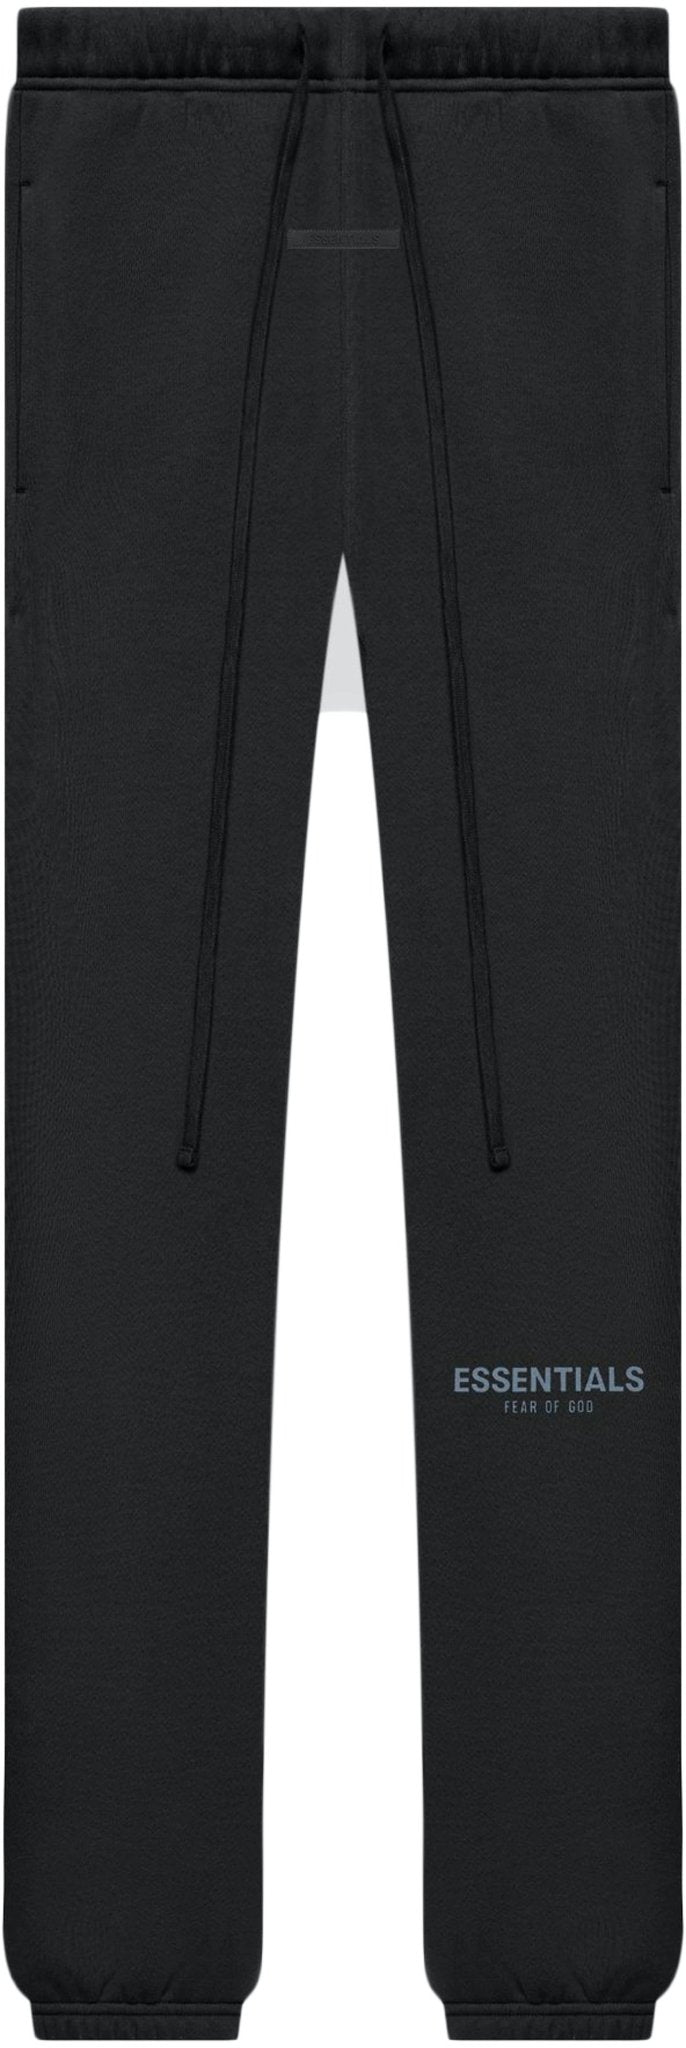 FEAR OF GOD ESSENTIALS BLACK CORE COLLECTION TRACKSUIT - Hype Locker UK